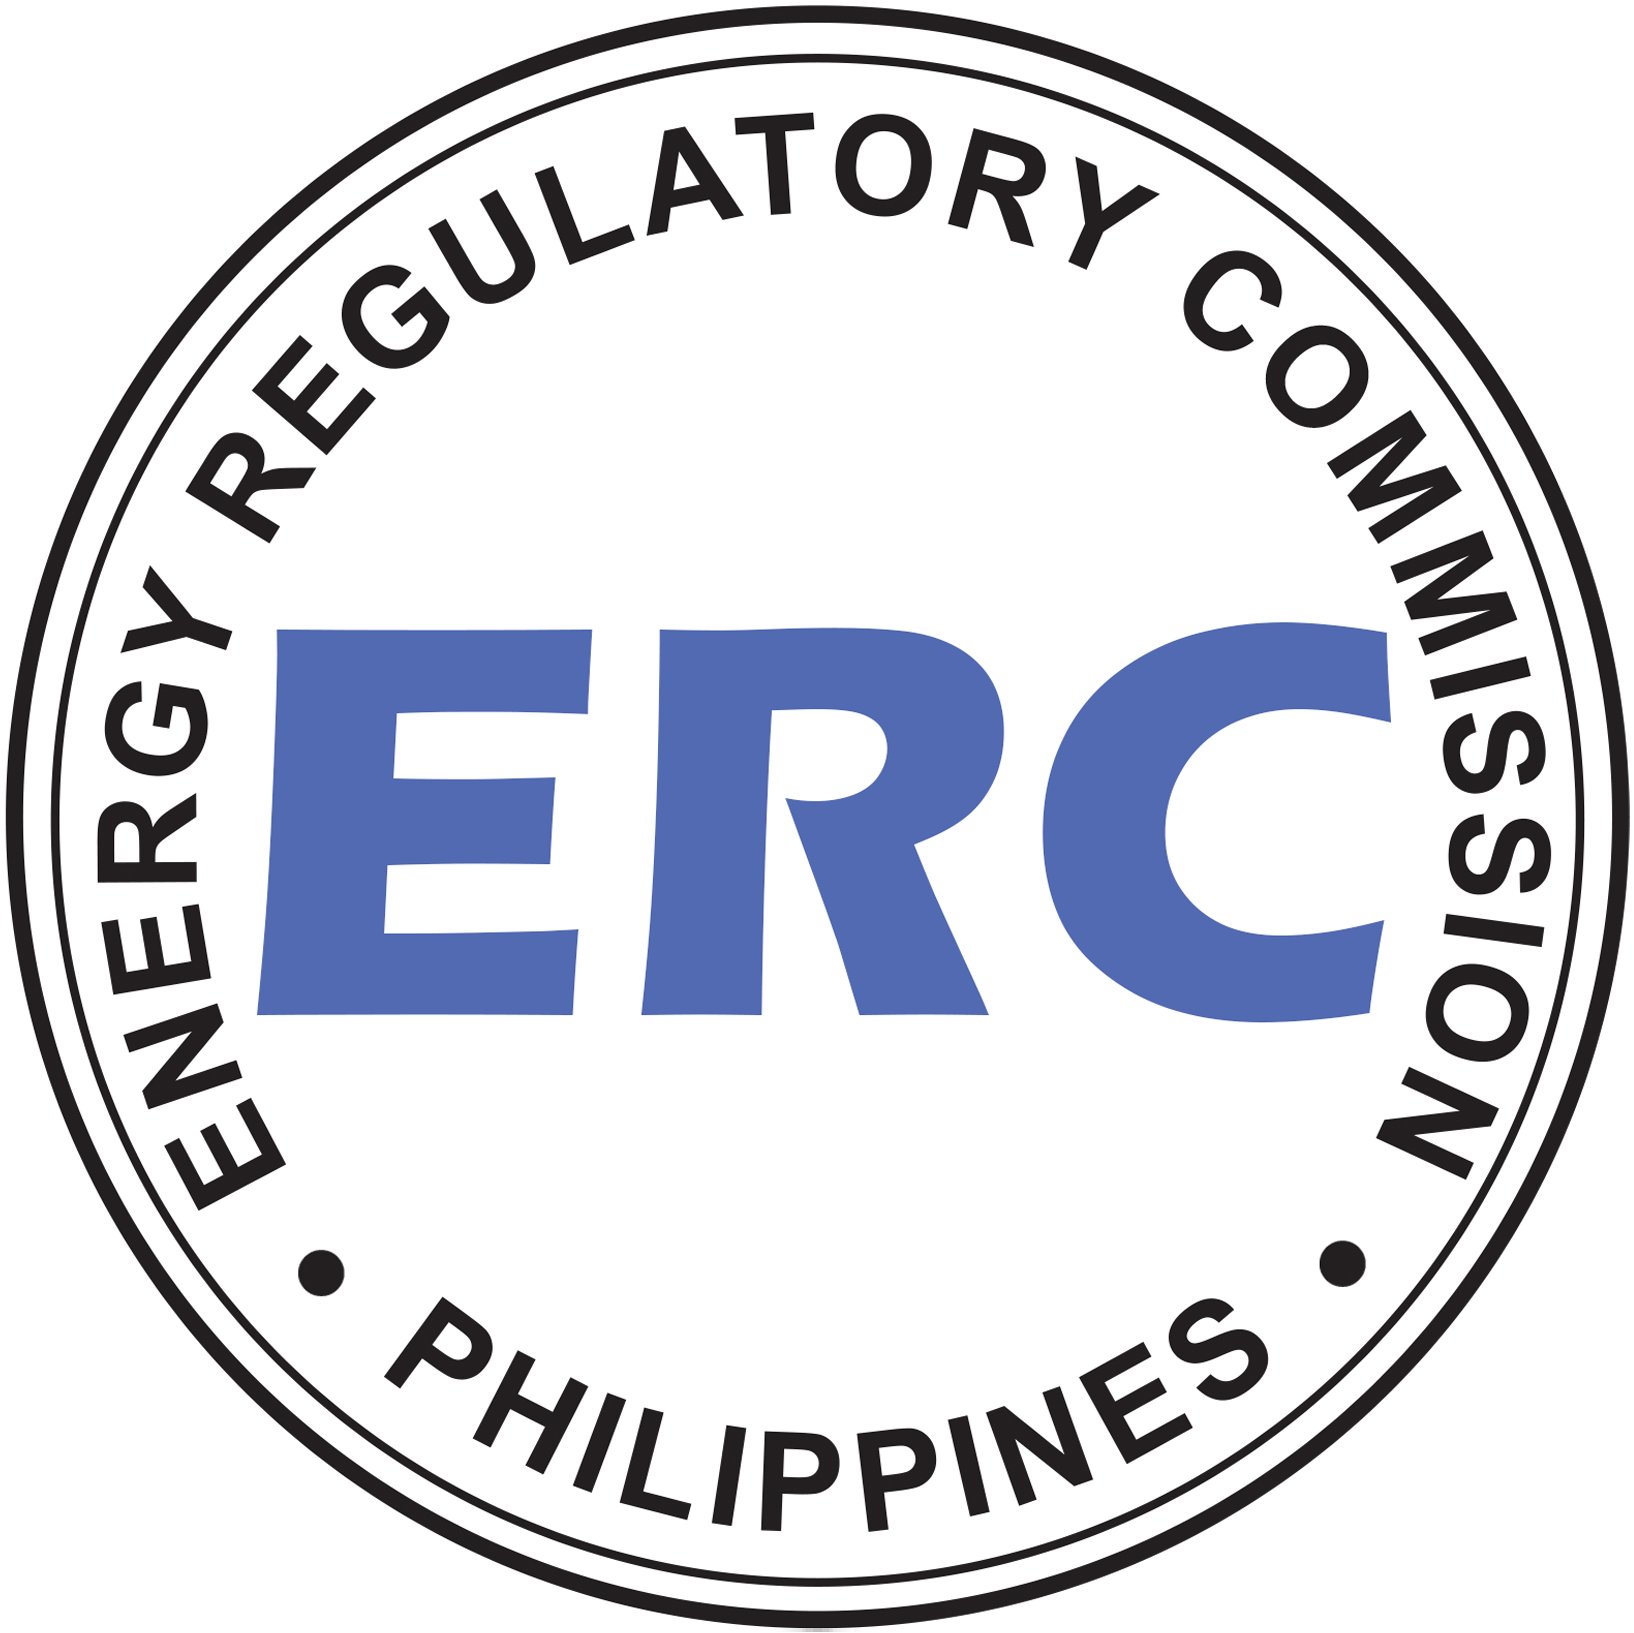 A world-class and independent electric power industry regulator that equitably promotes and protects the interests of consumers and other stakeholders.